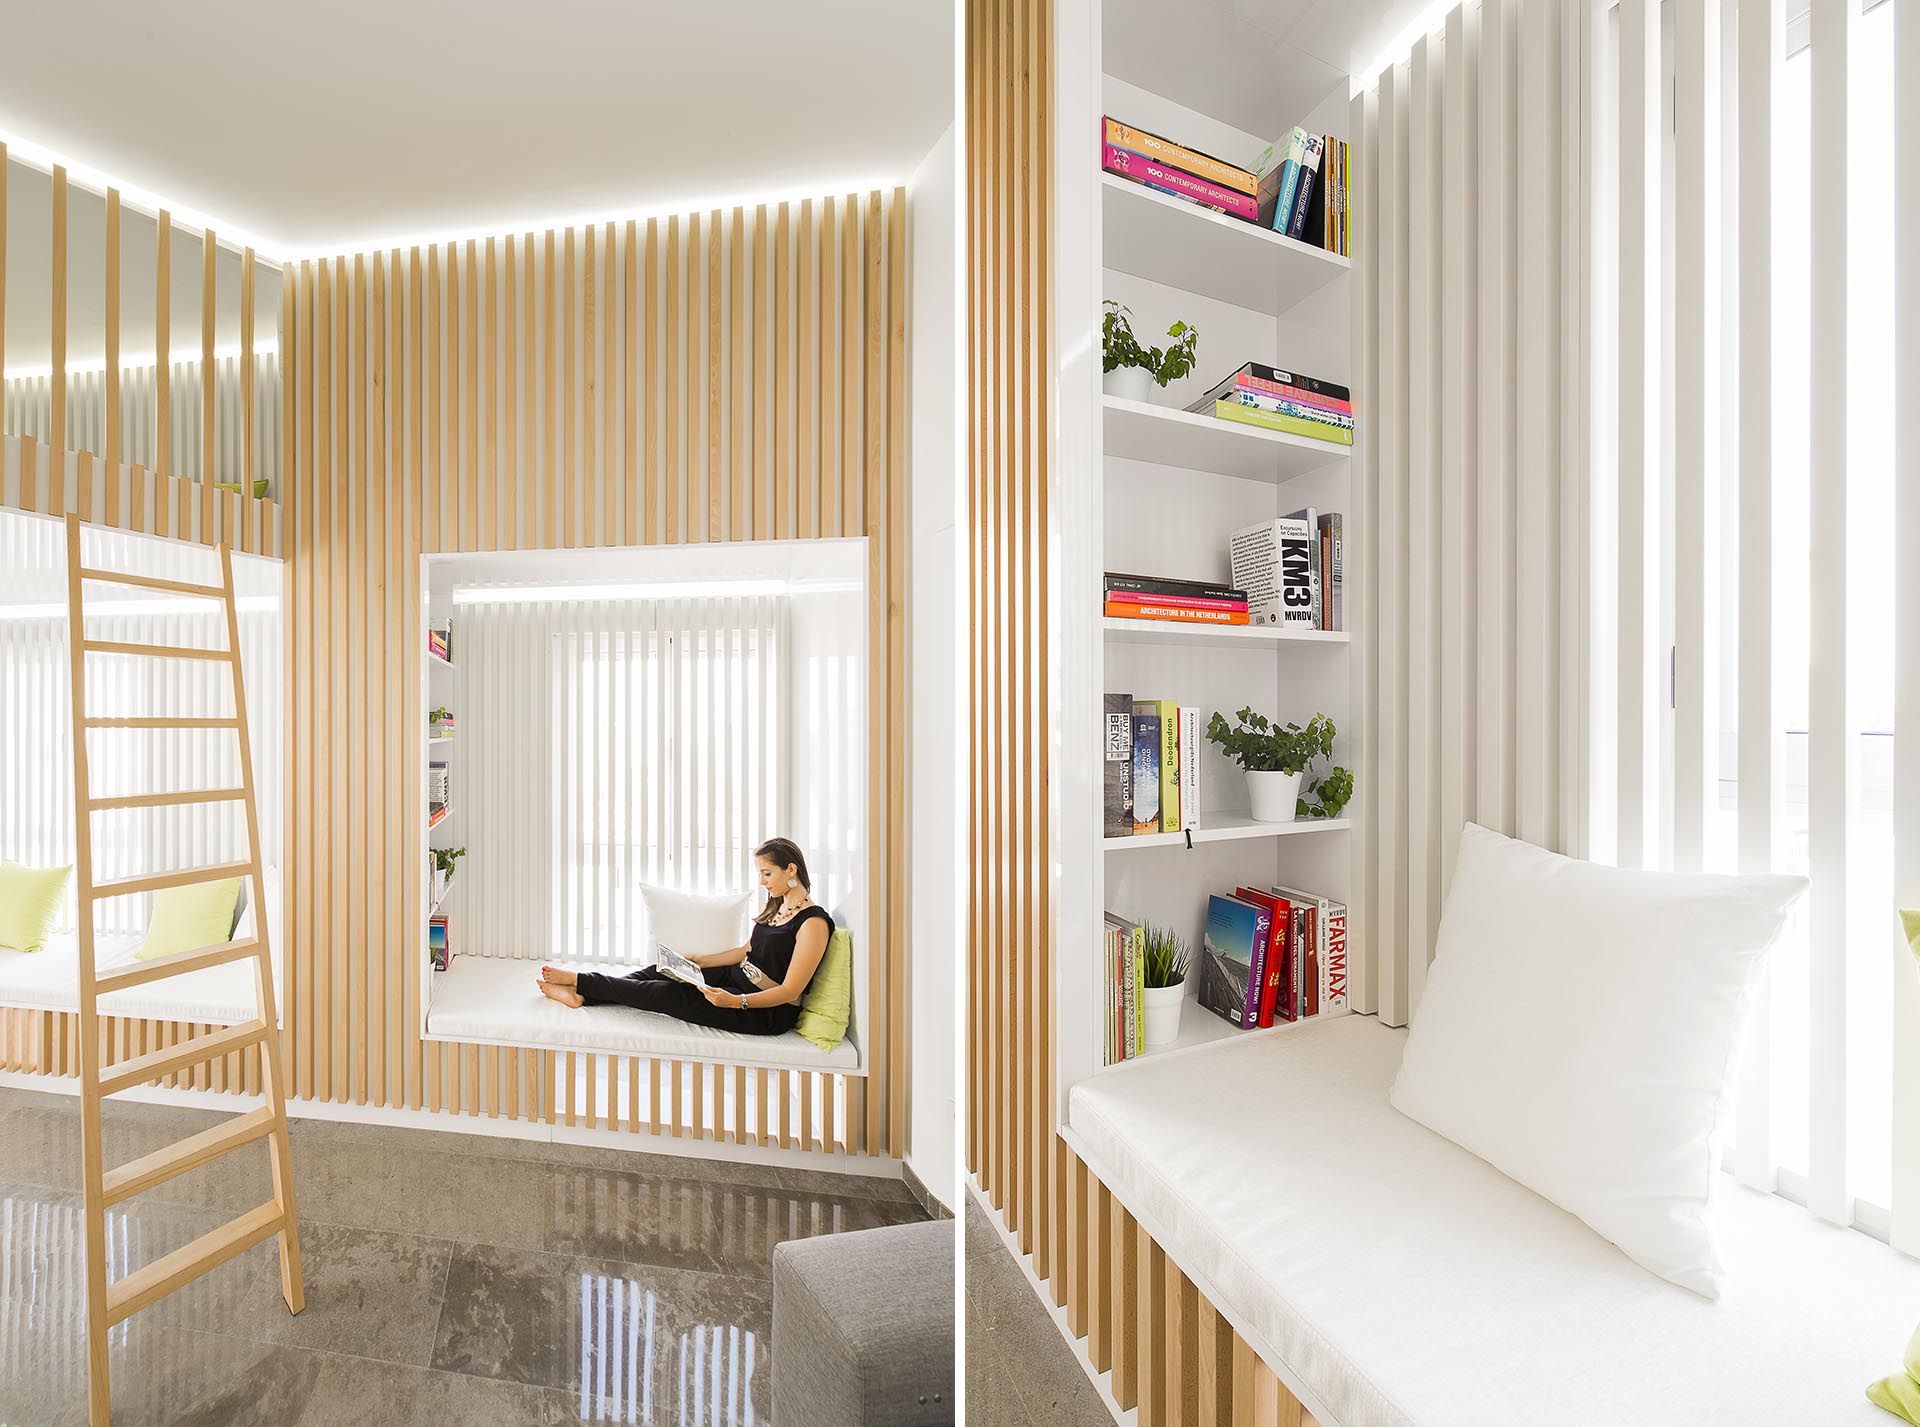 A window seat with a bookshelf that are surrounded by wood slats.